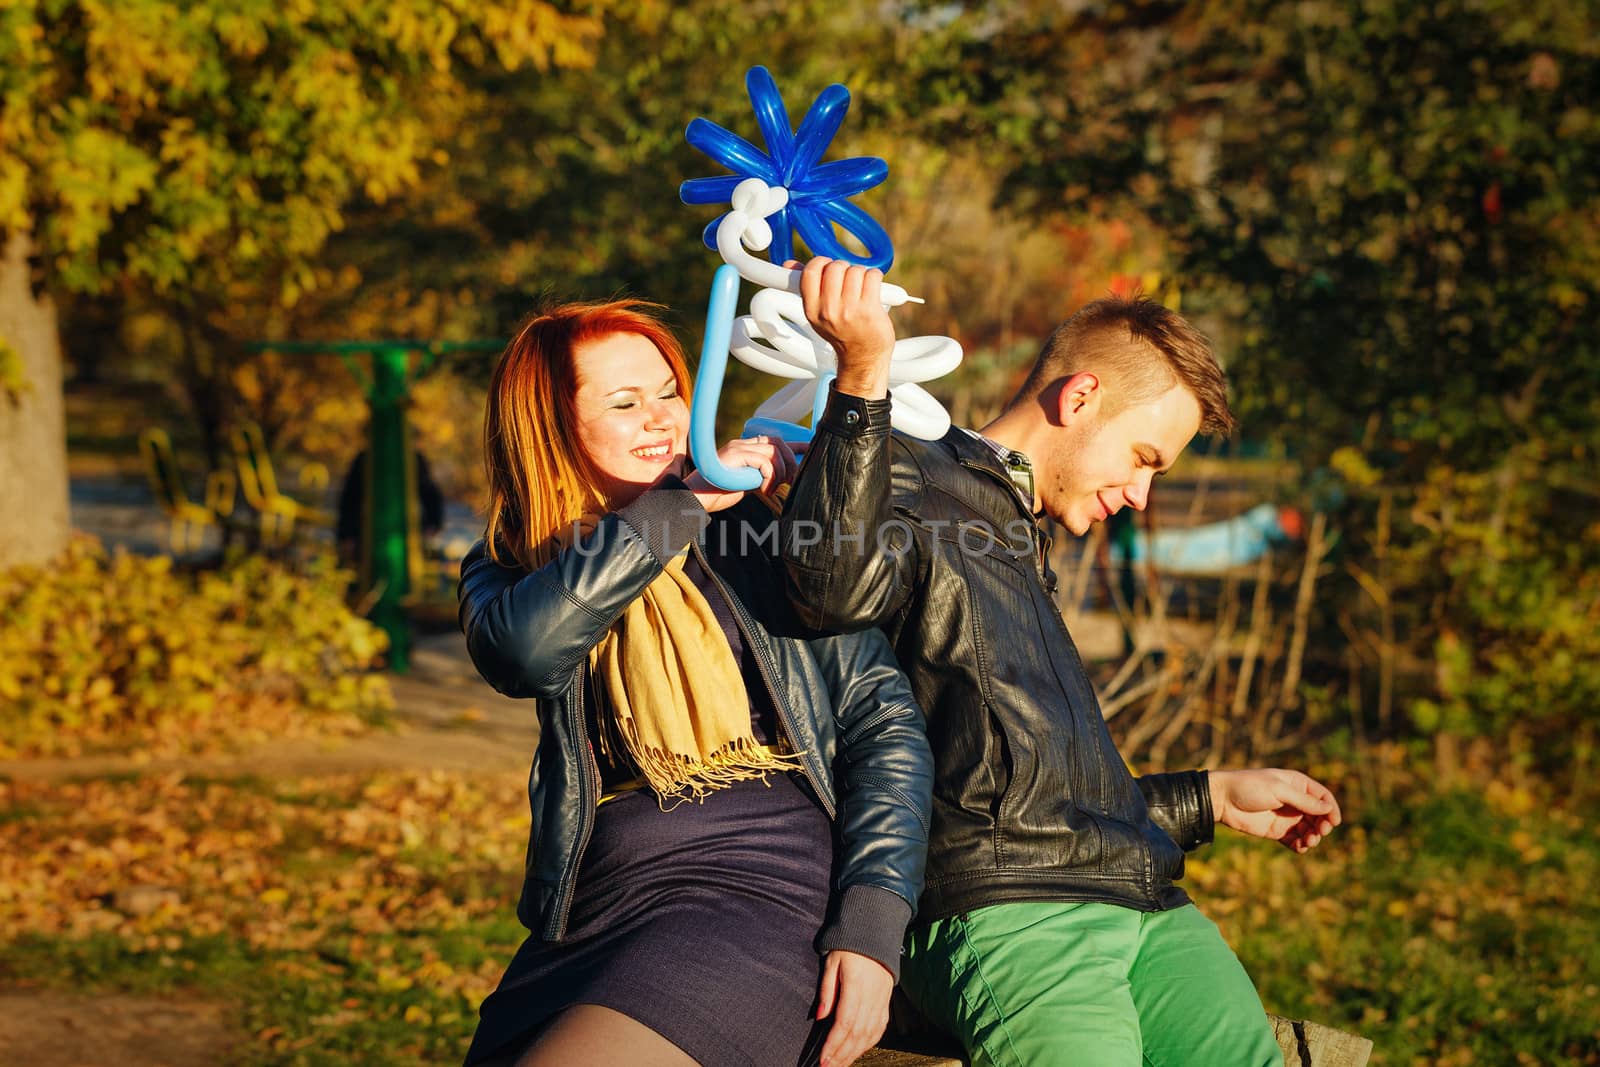 Couple playing with balloons in autumn park on a sunny day